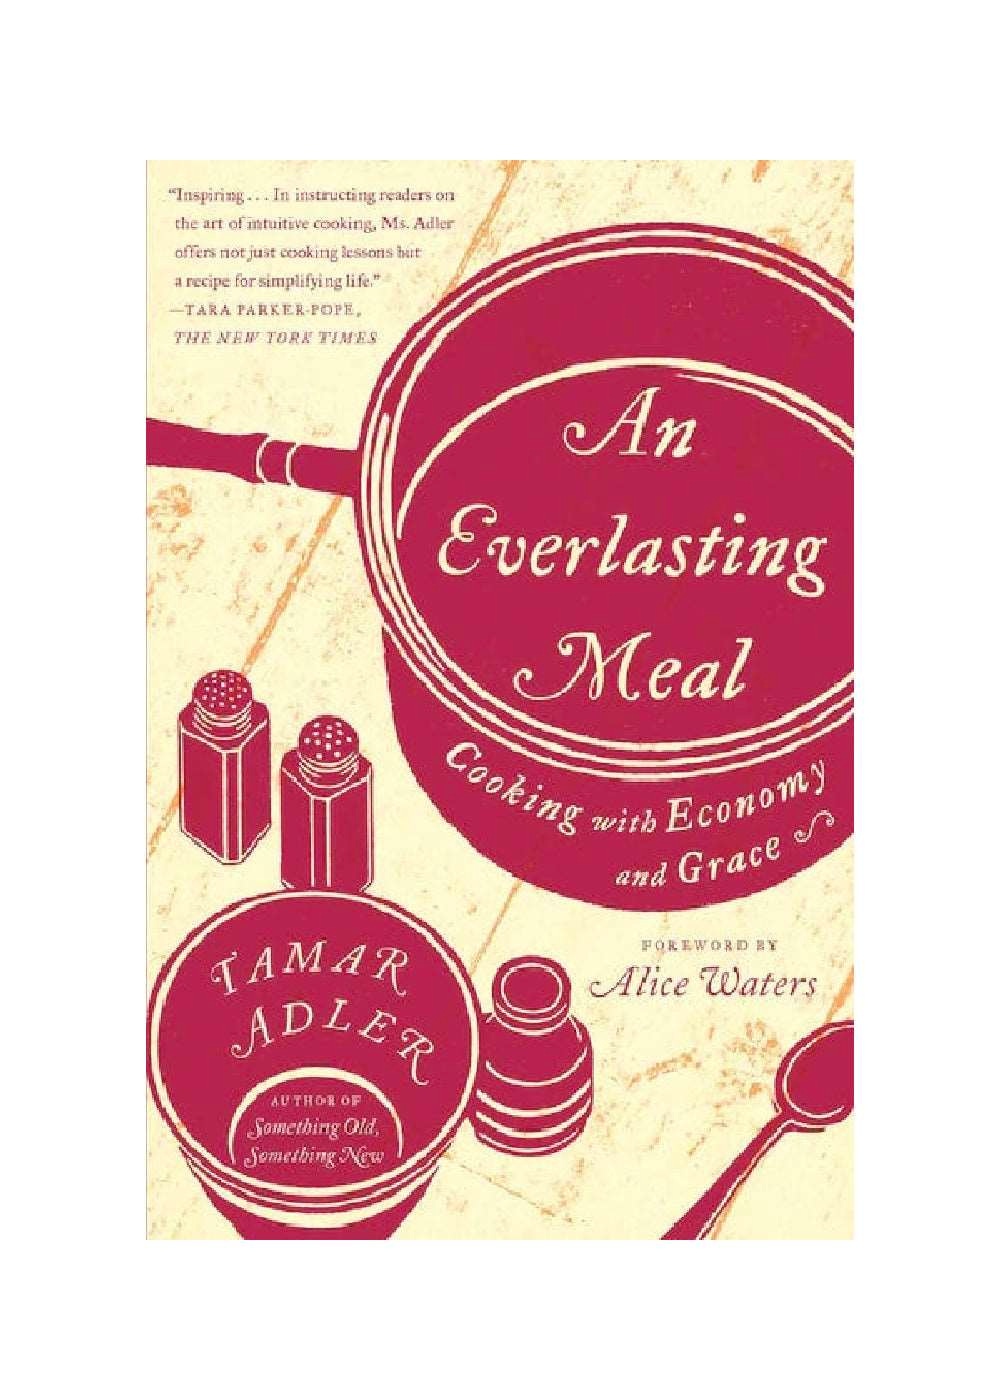 The illustrated cover of An Everlasting Meal: Cooking with Economy and Grace by Tamar Adler, showing a pot, a spoon, and slat and pepper shakers.